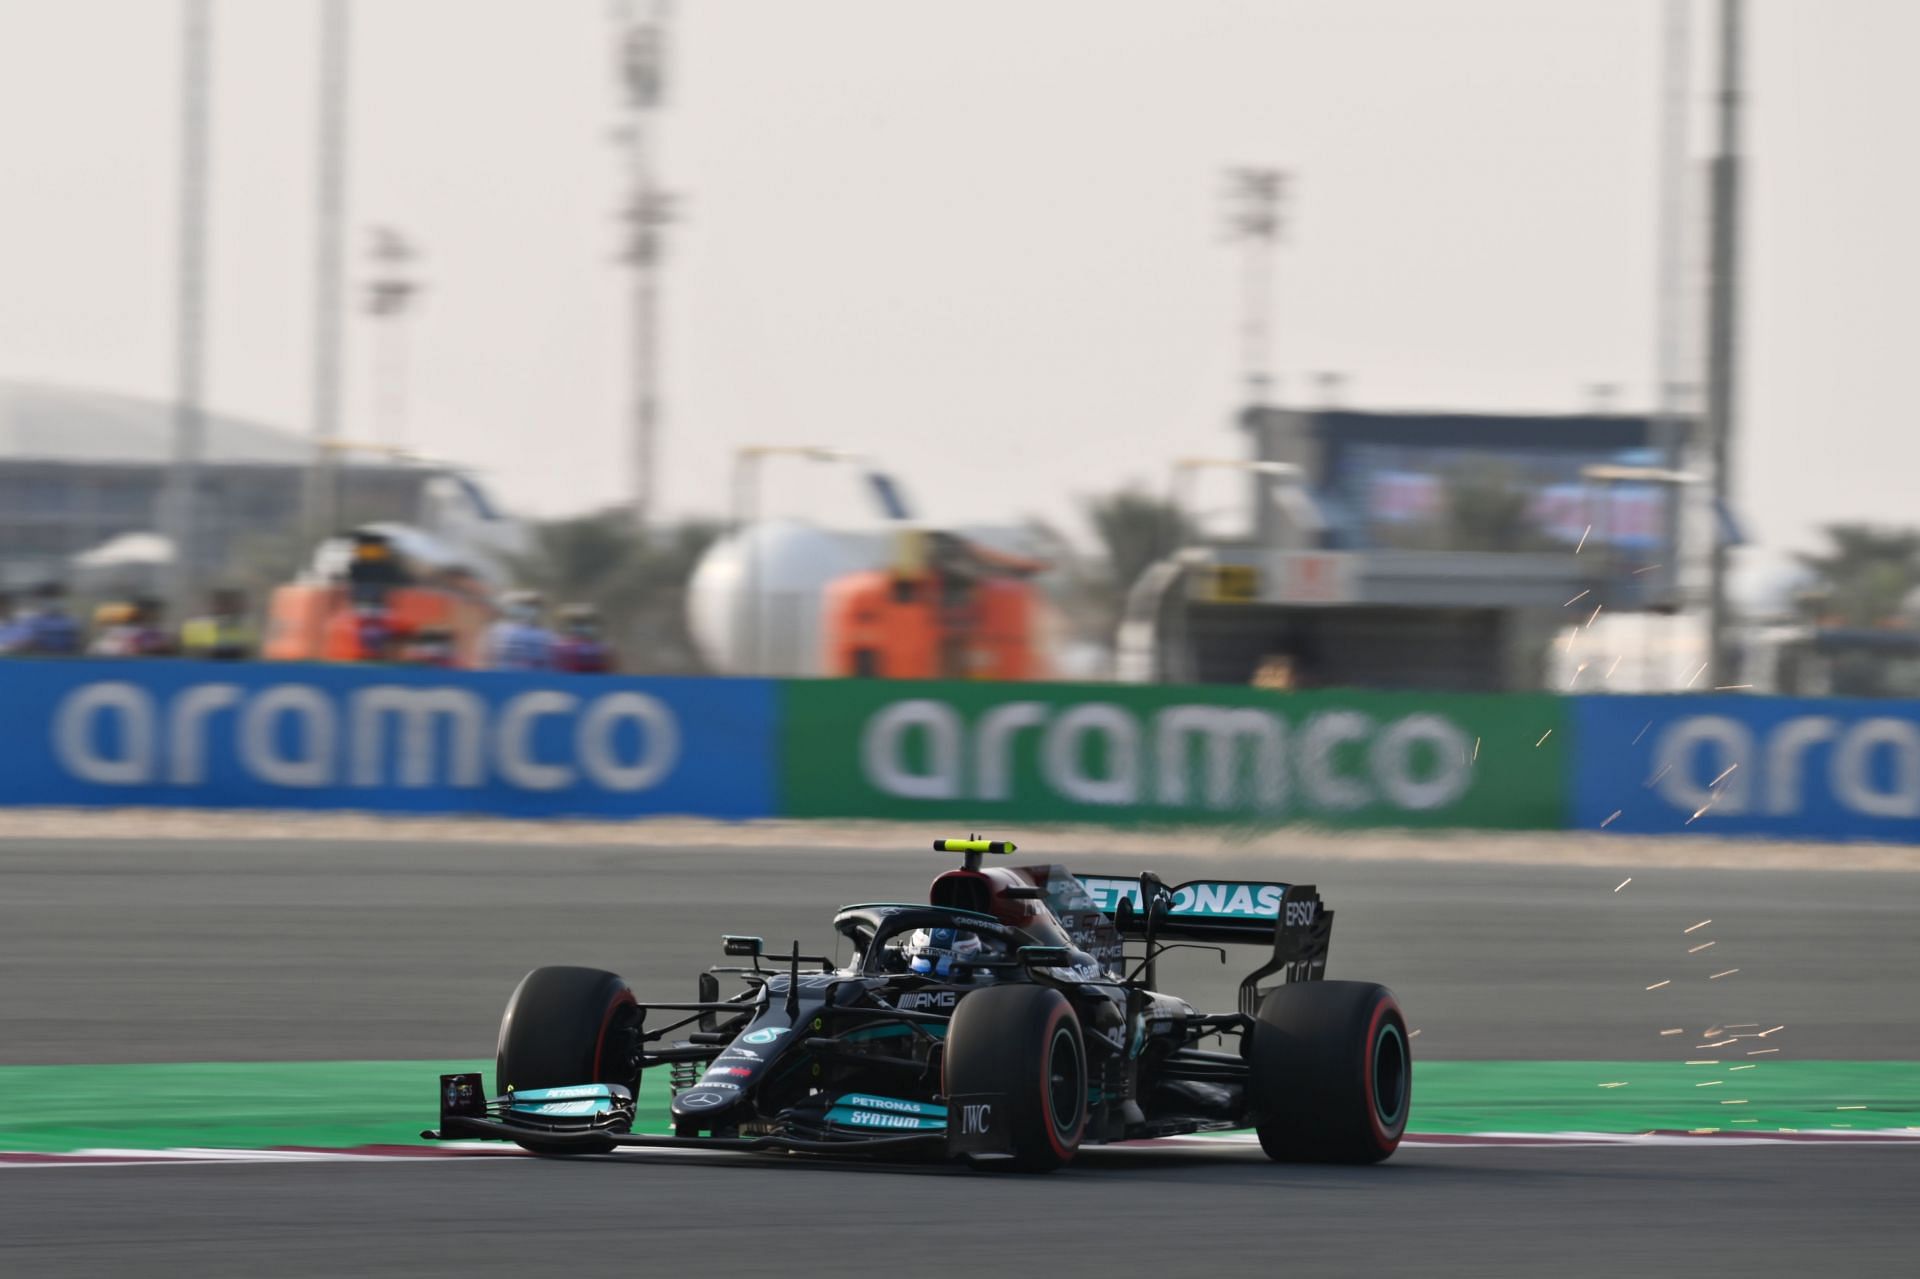 Valtteri Bottas beat Lewis Hamilton in the third practice ahead of Qatar GP qualifying. (Photo by Clive Mason/Getty Images)